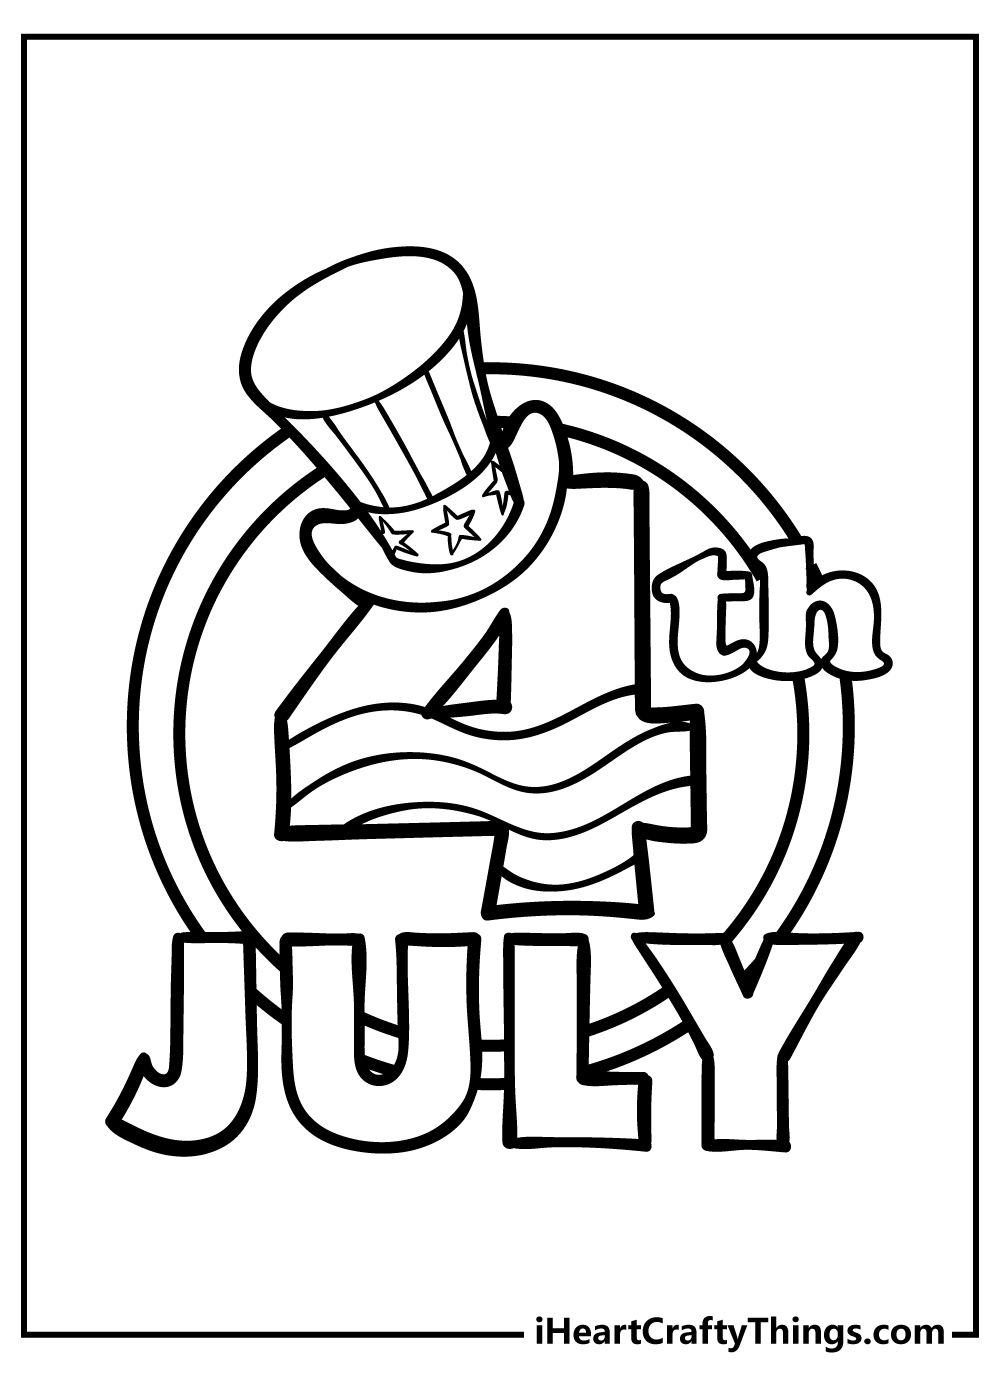 4th Of July Coloring Pages for kids free download